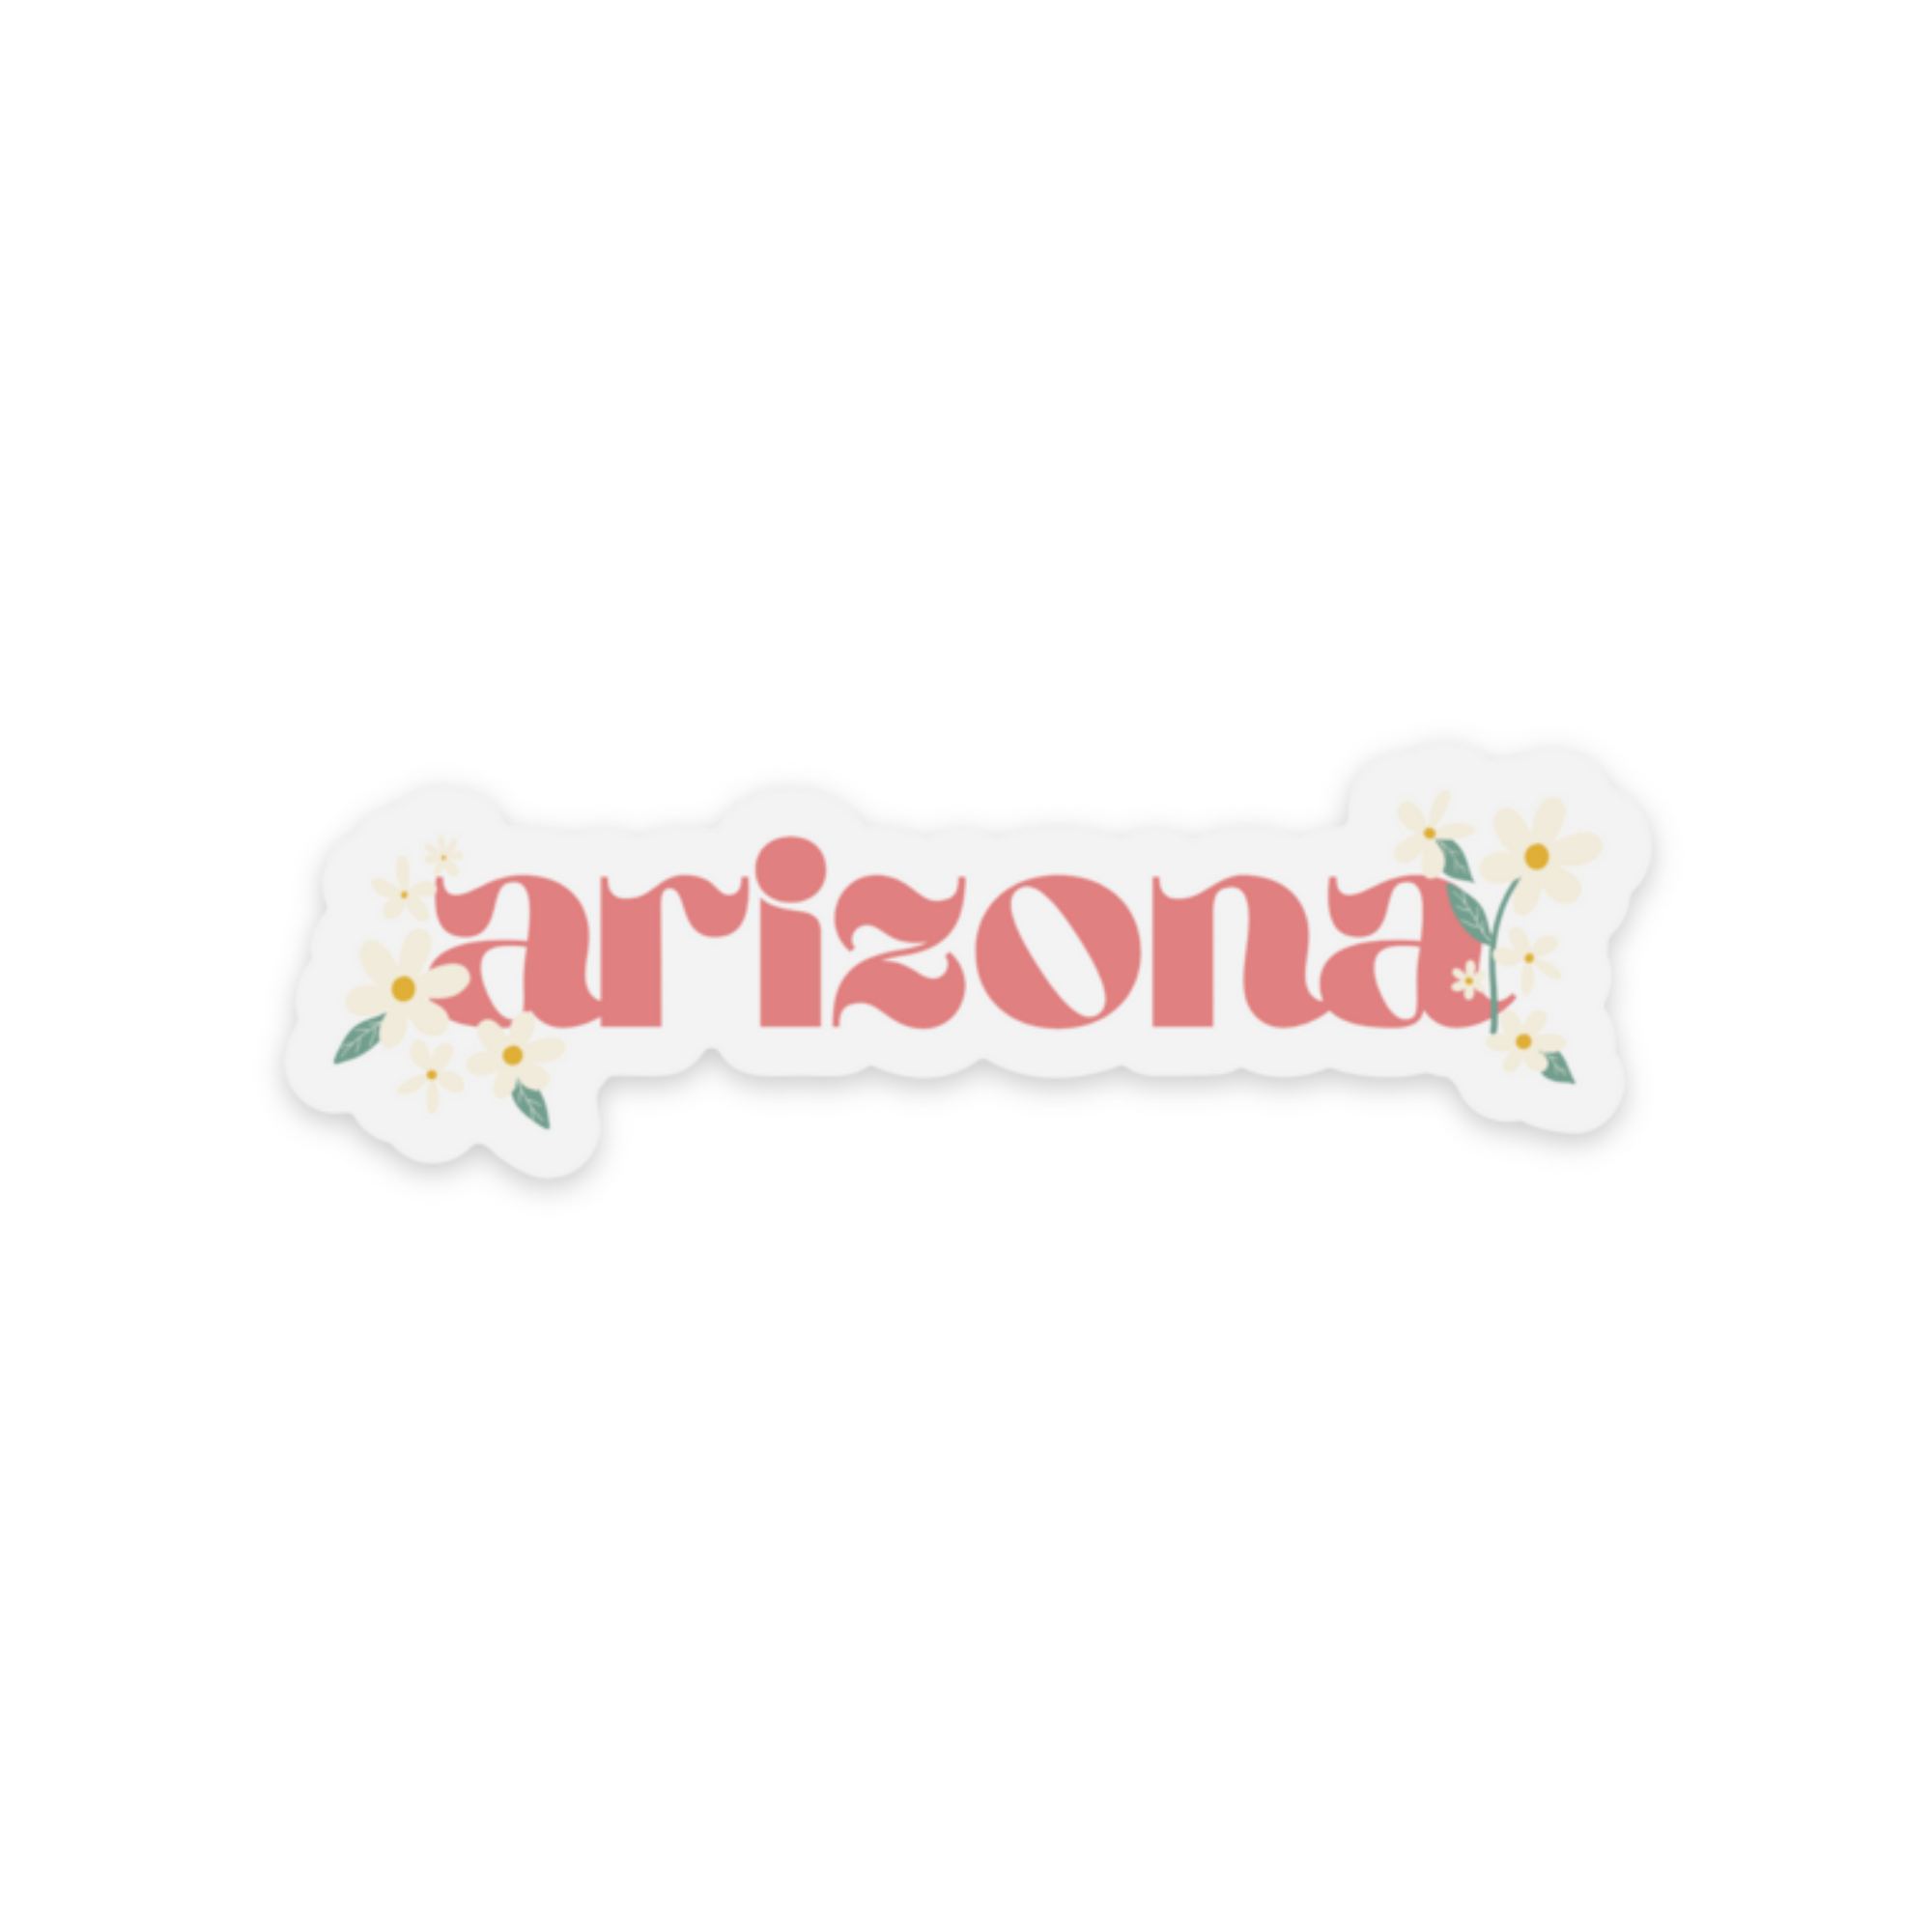 Die cut sticker with clear back and the word "arizona" surrounded by daisies